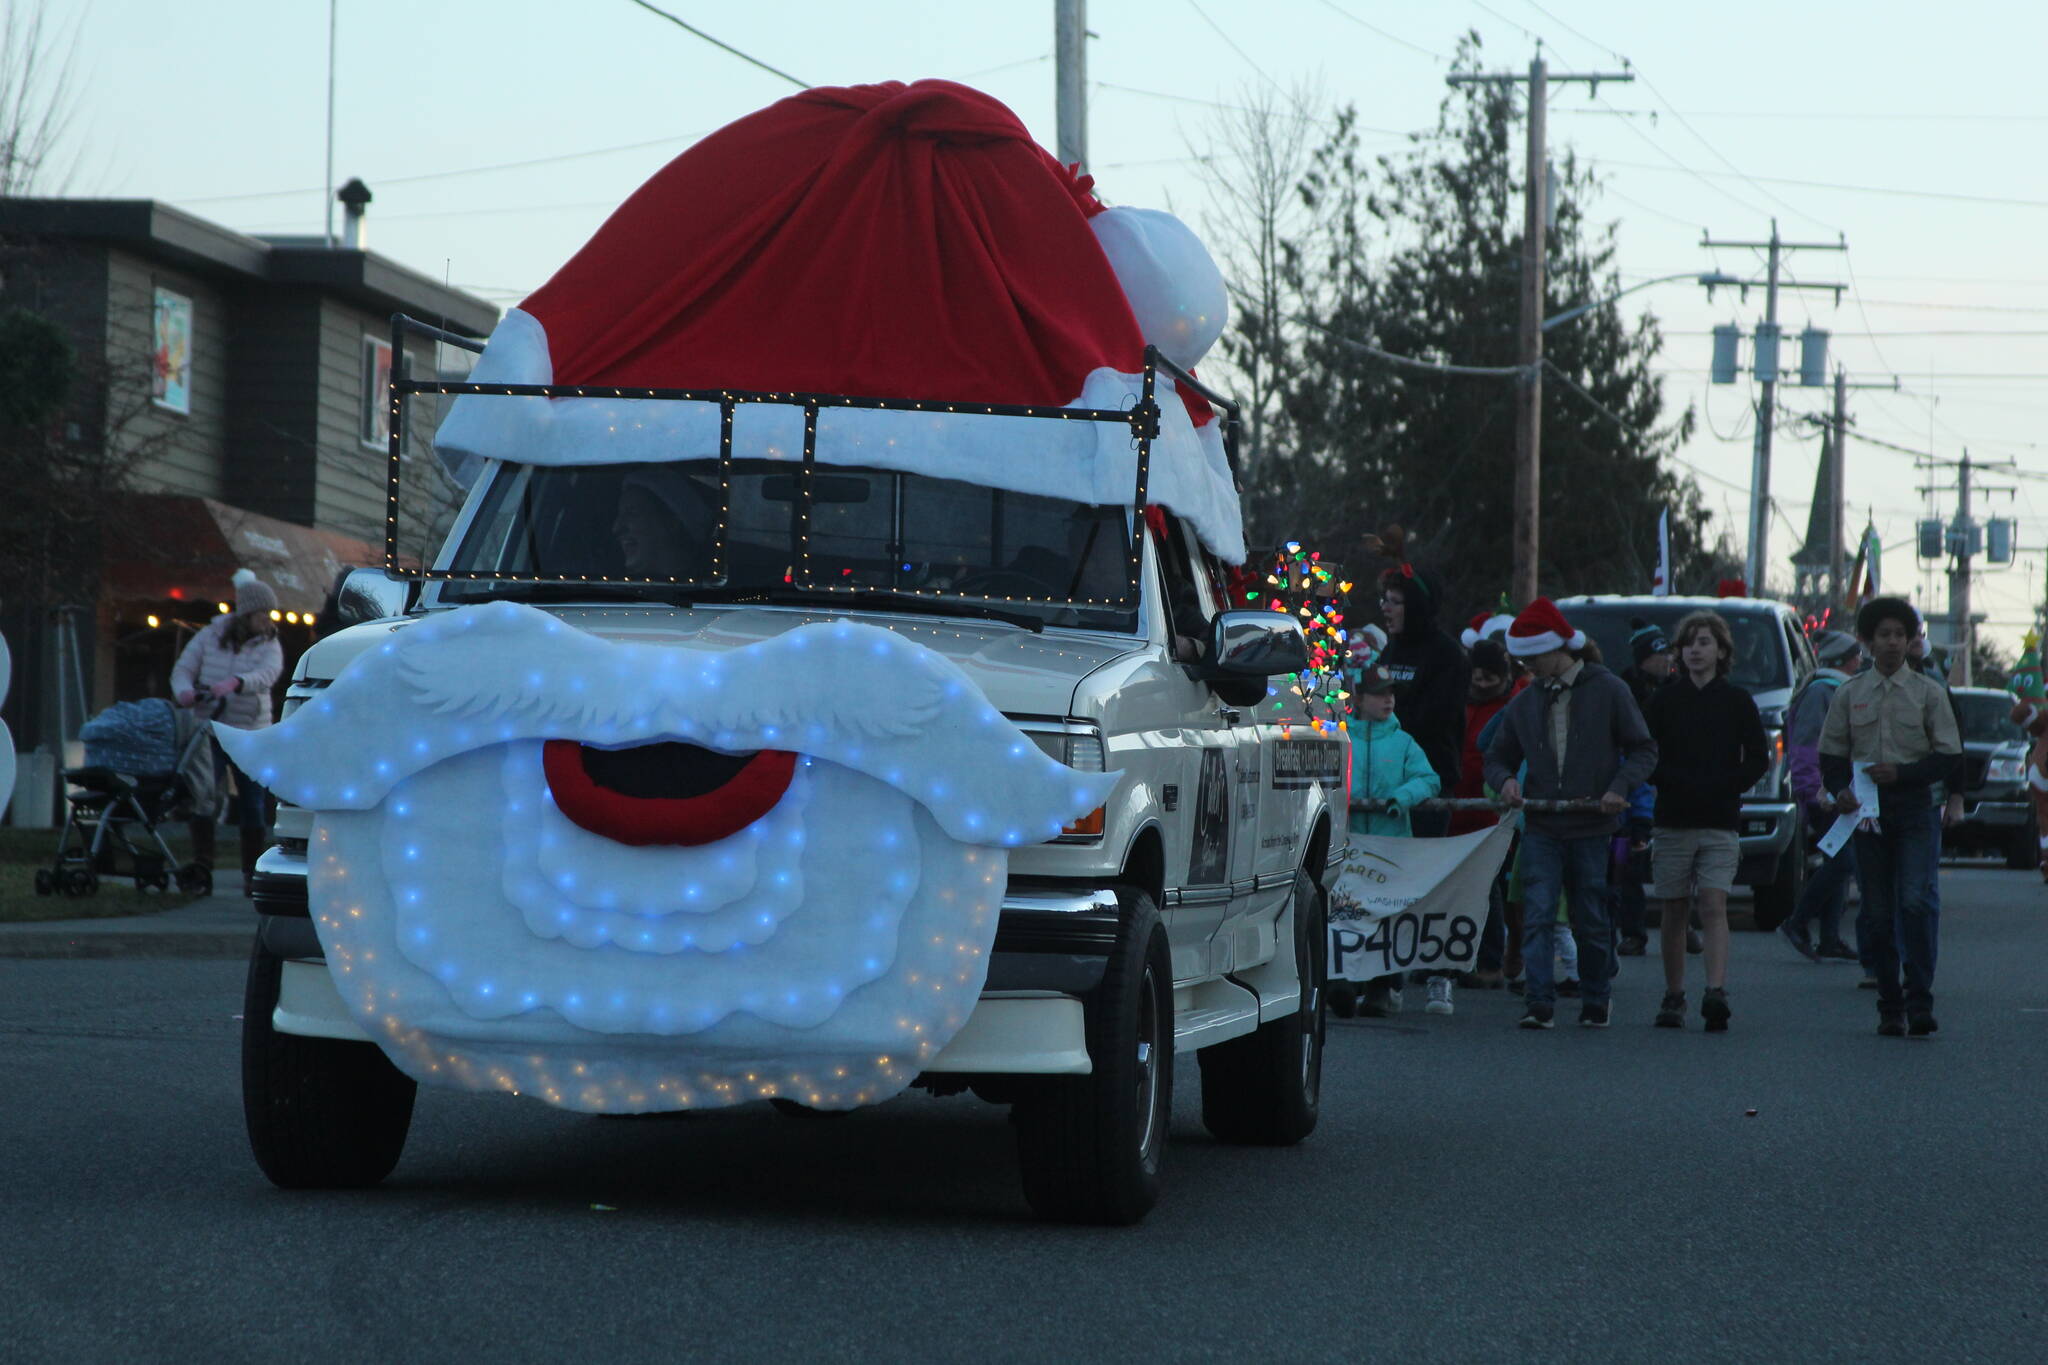 Photo by Karina Andrew/Whidbey News-Times
A truck decked out like St. Nick himself trundles down Main Street during the Greening of Coupeville.